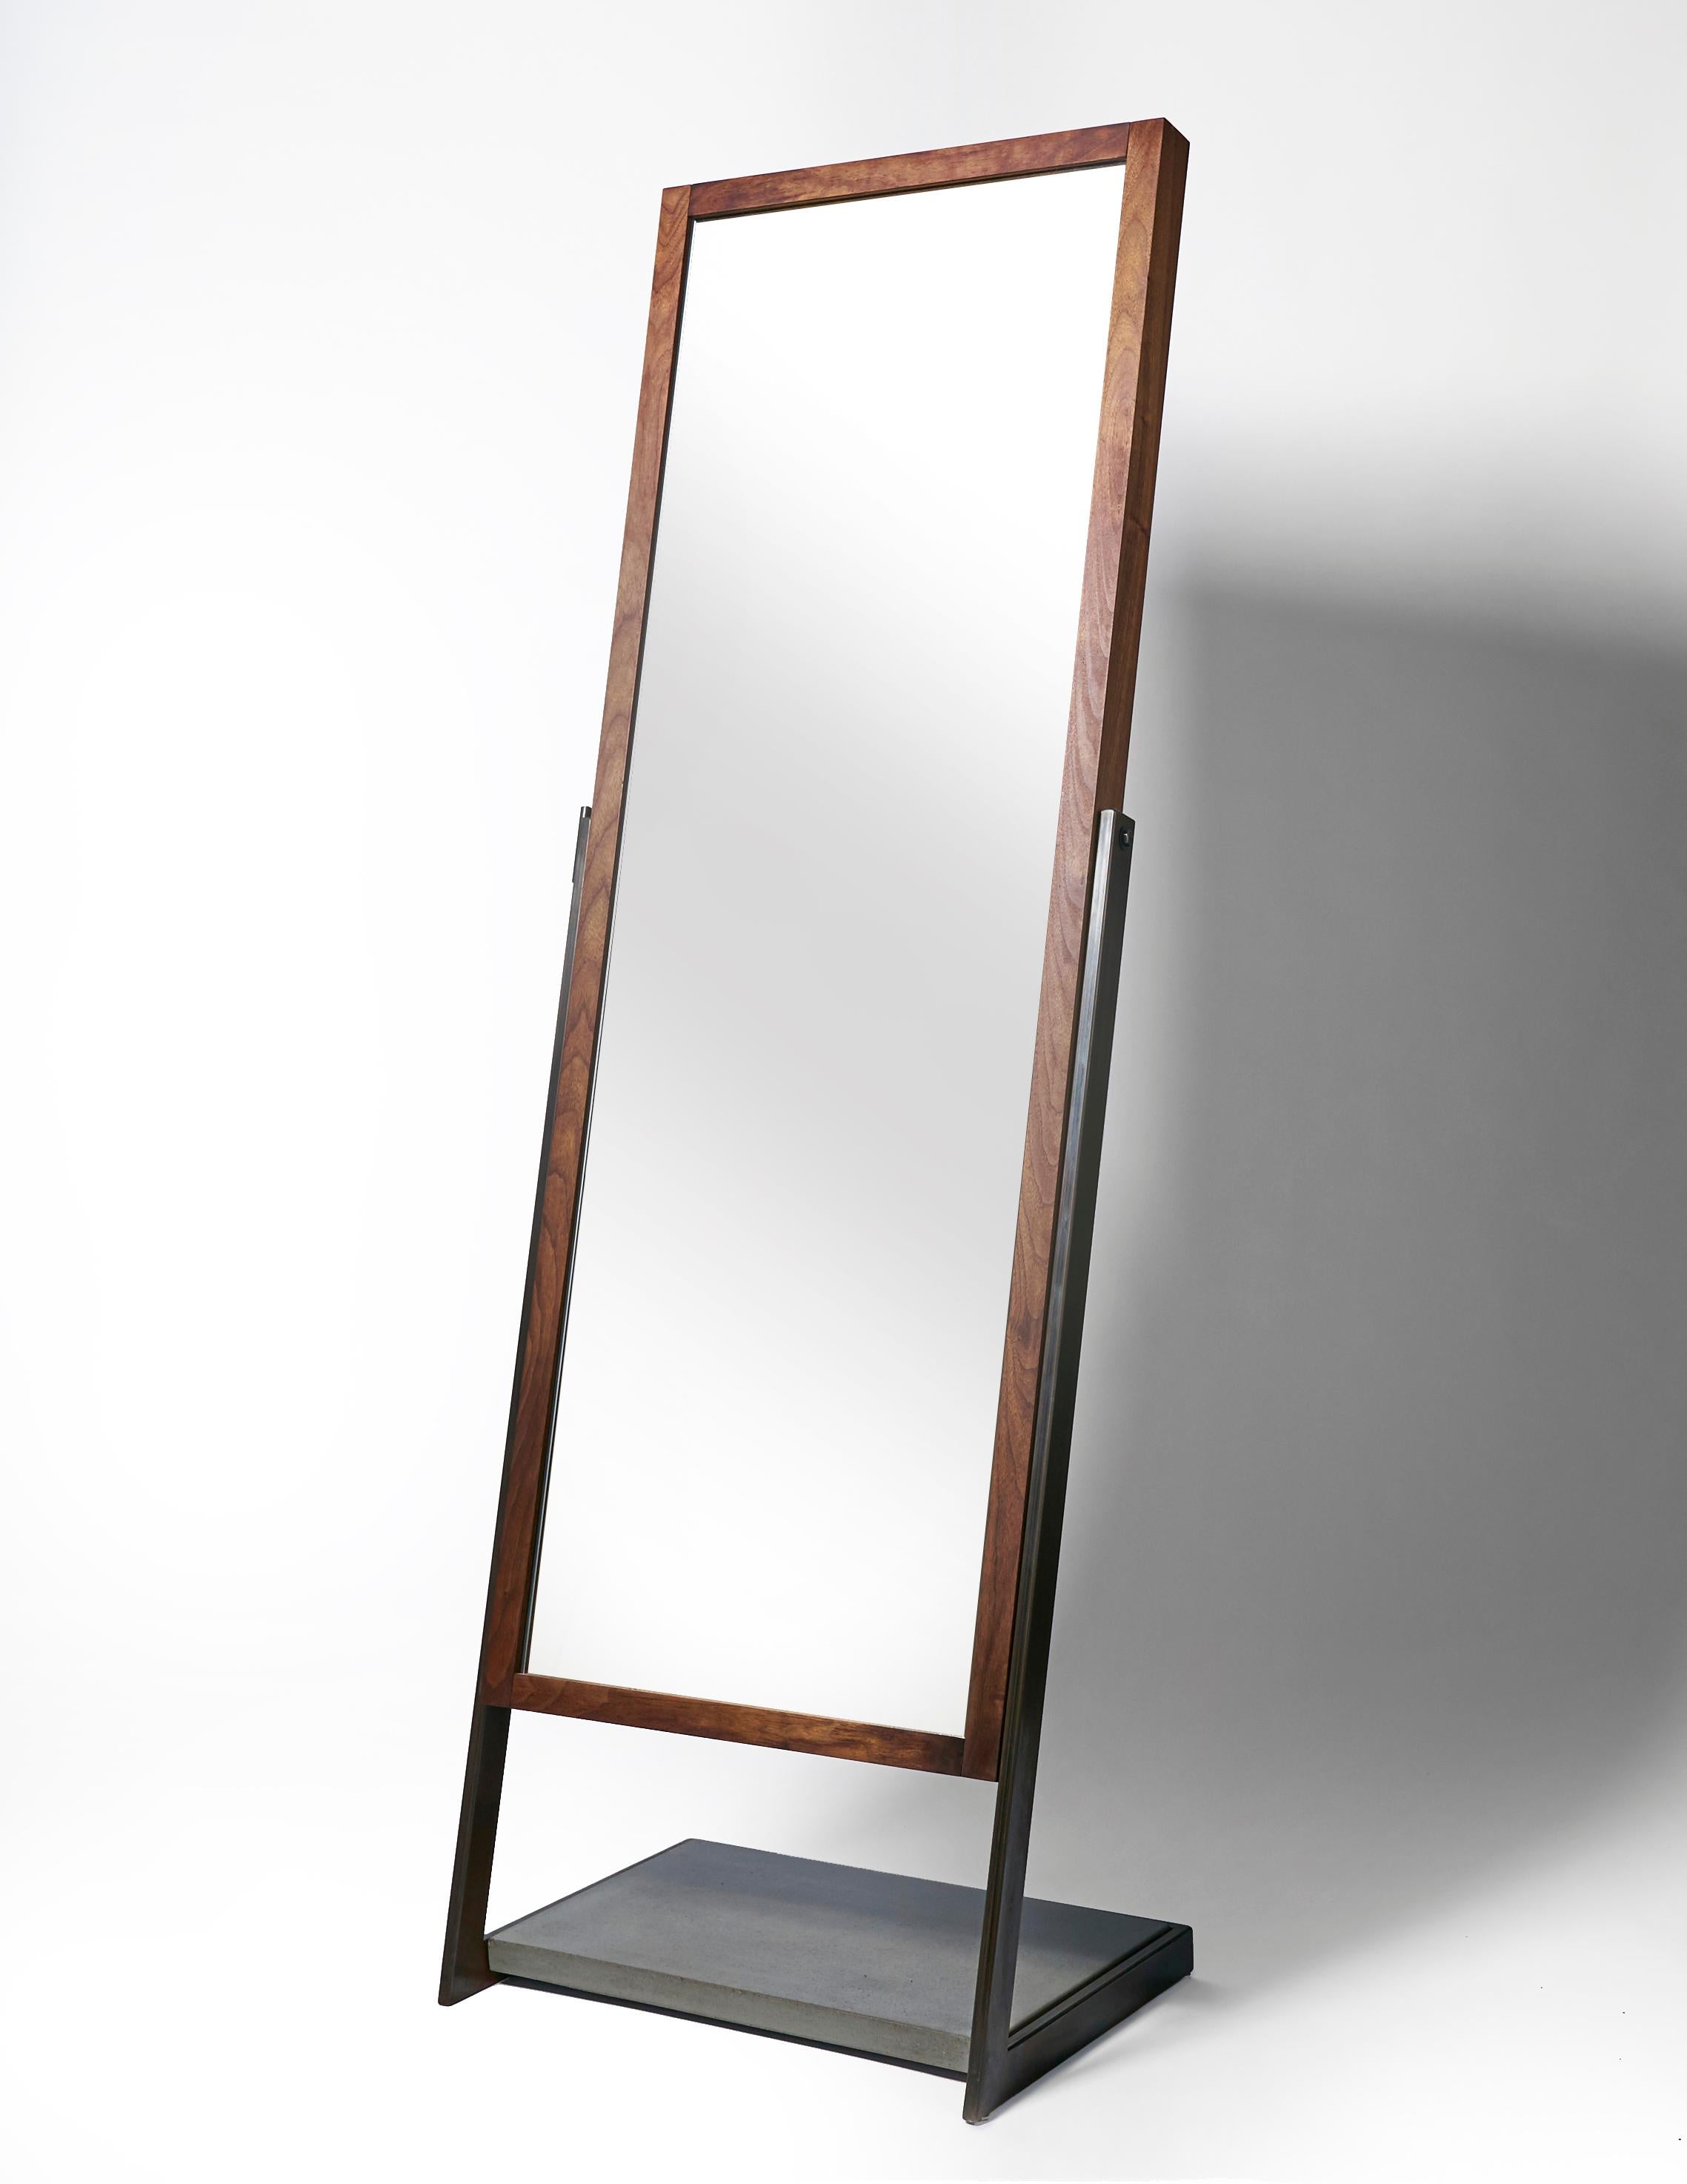 Full length mirror imagined in a new way with a perfect balance in both materials and lines. A wrap around hand blackened steel frame holds a lower platform section of charcoal concrete at the base. Suspended in this frame is a full length mirror